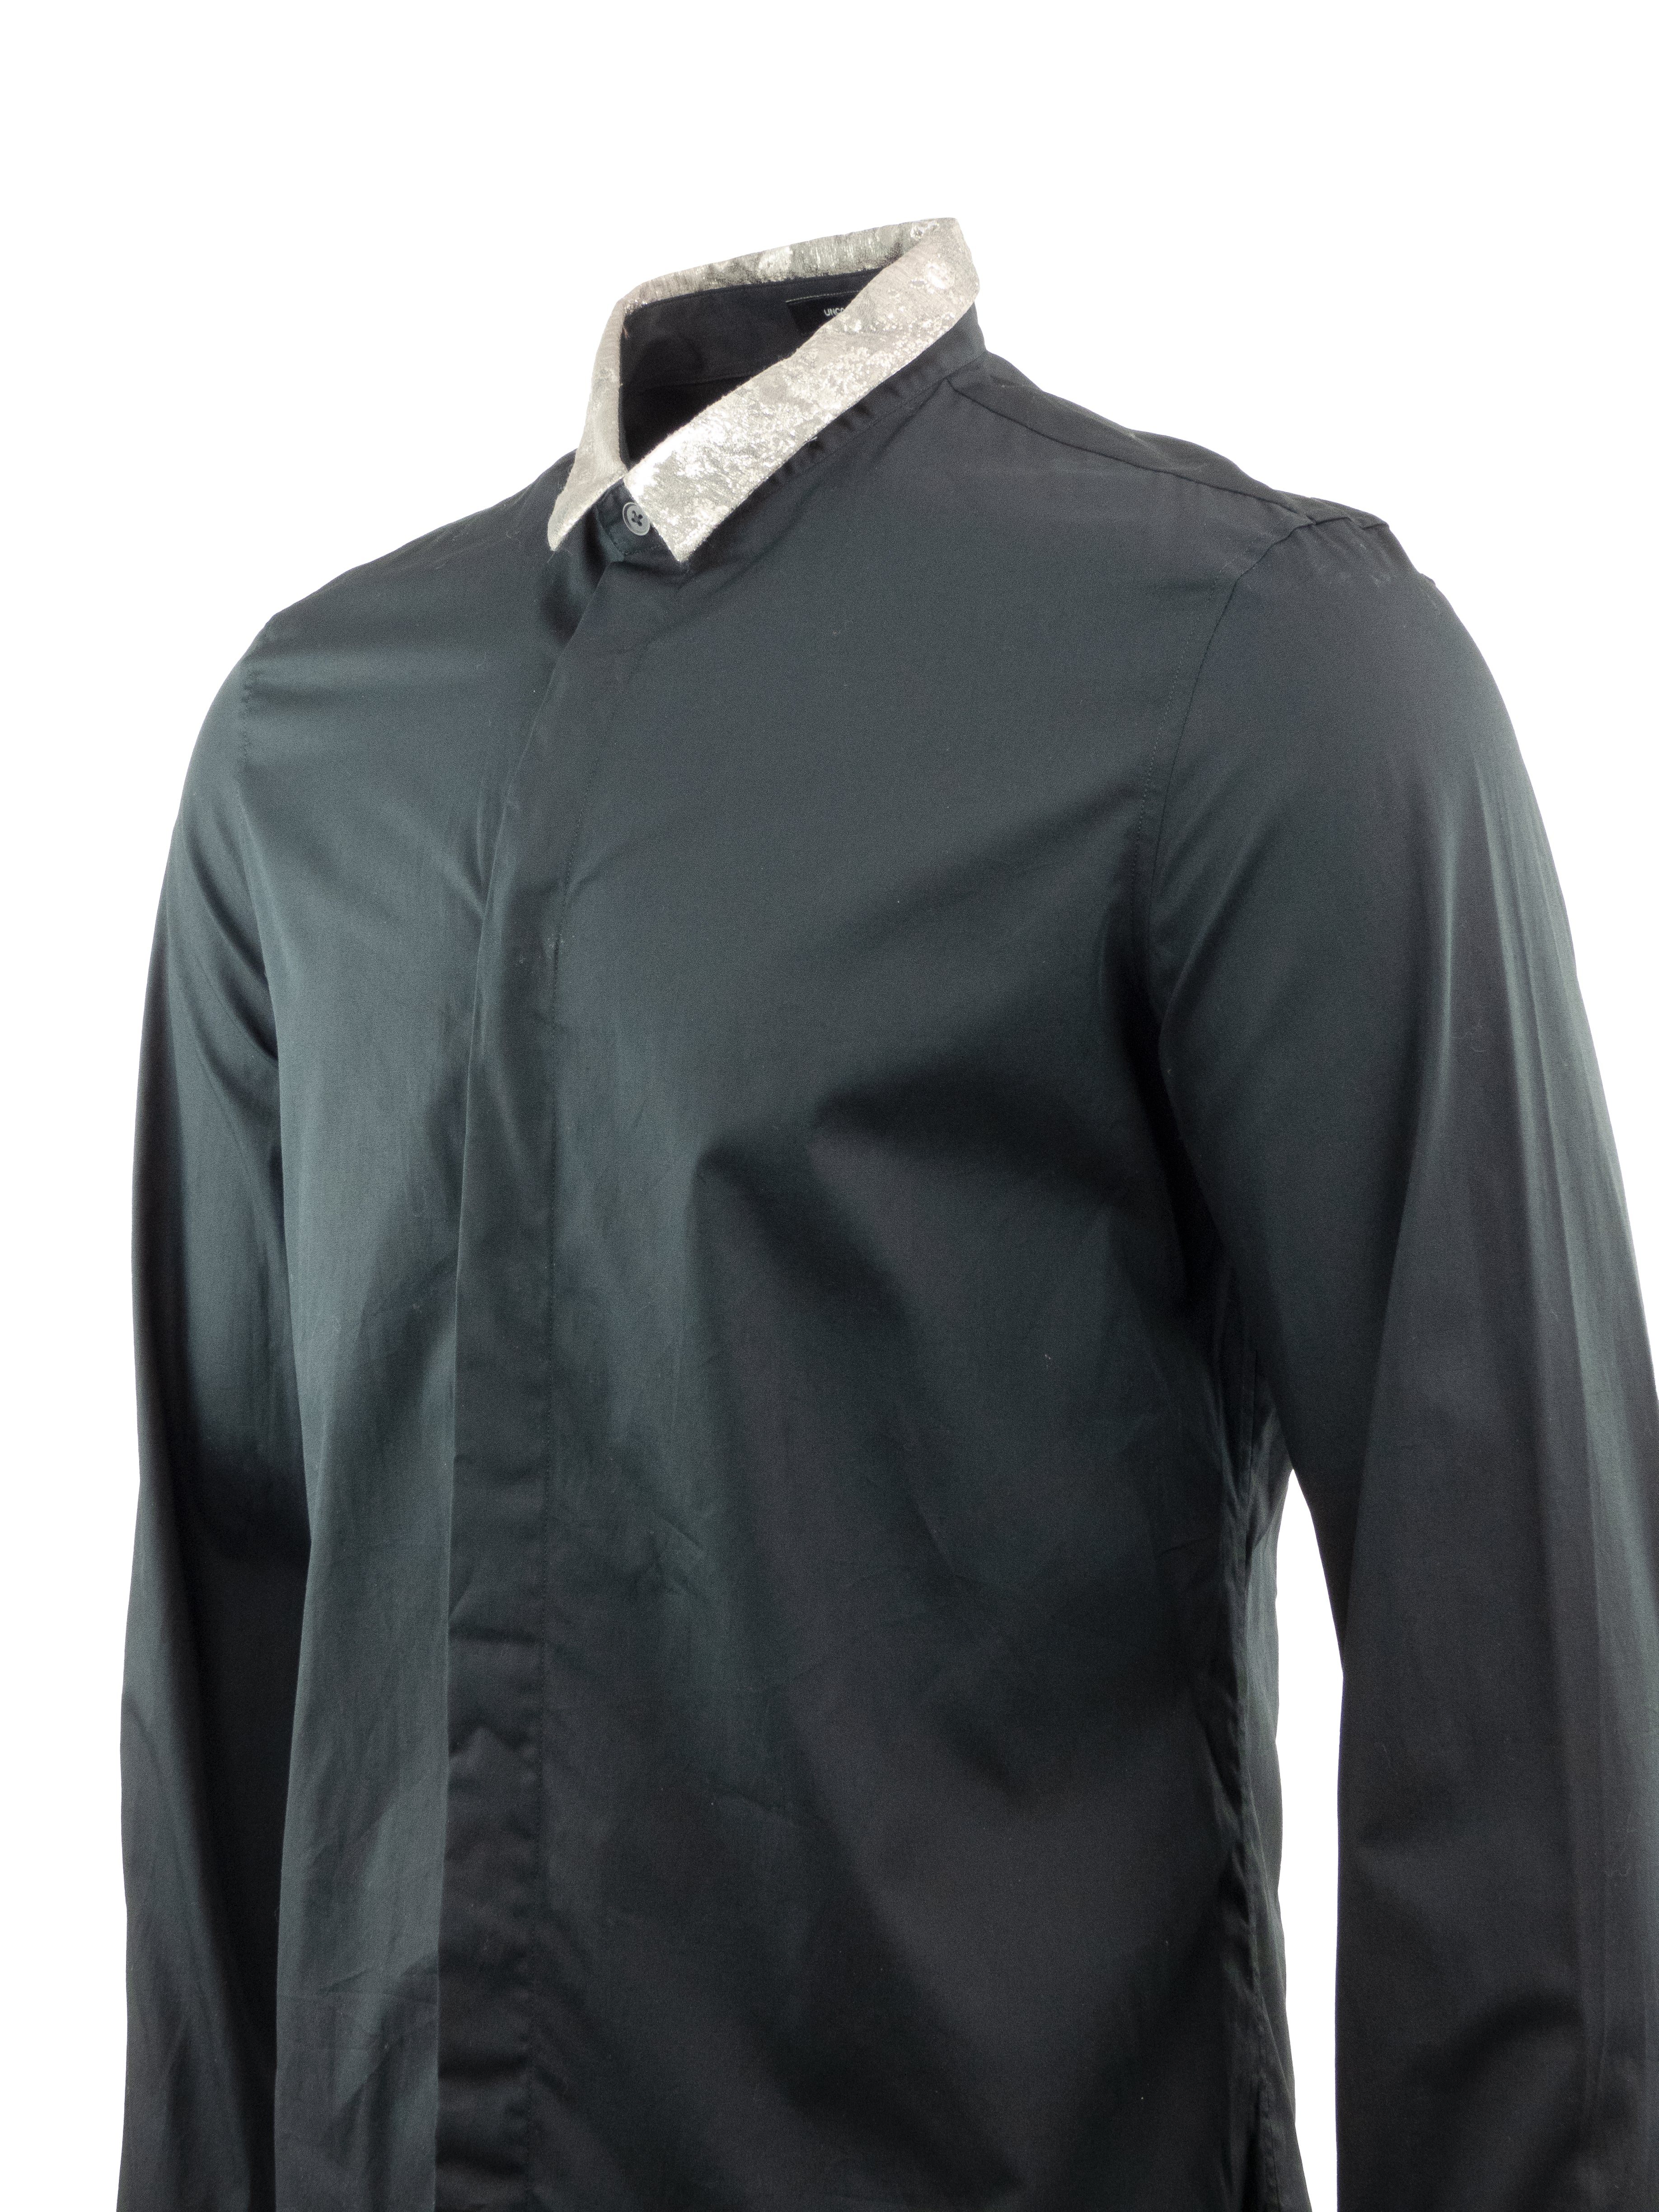 BLACK SHIRT WITH SILVER DETAILING